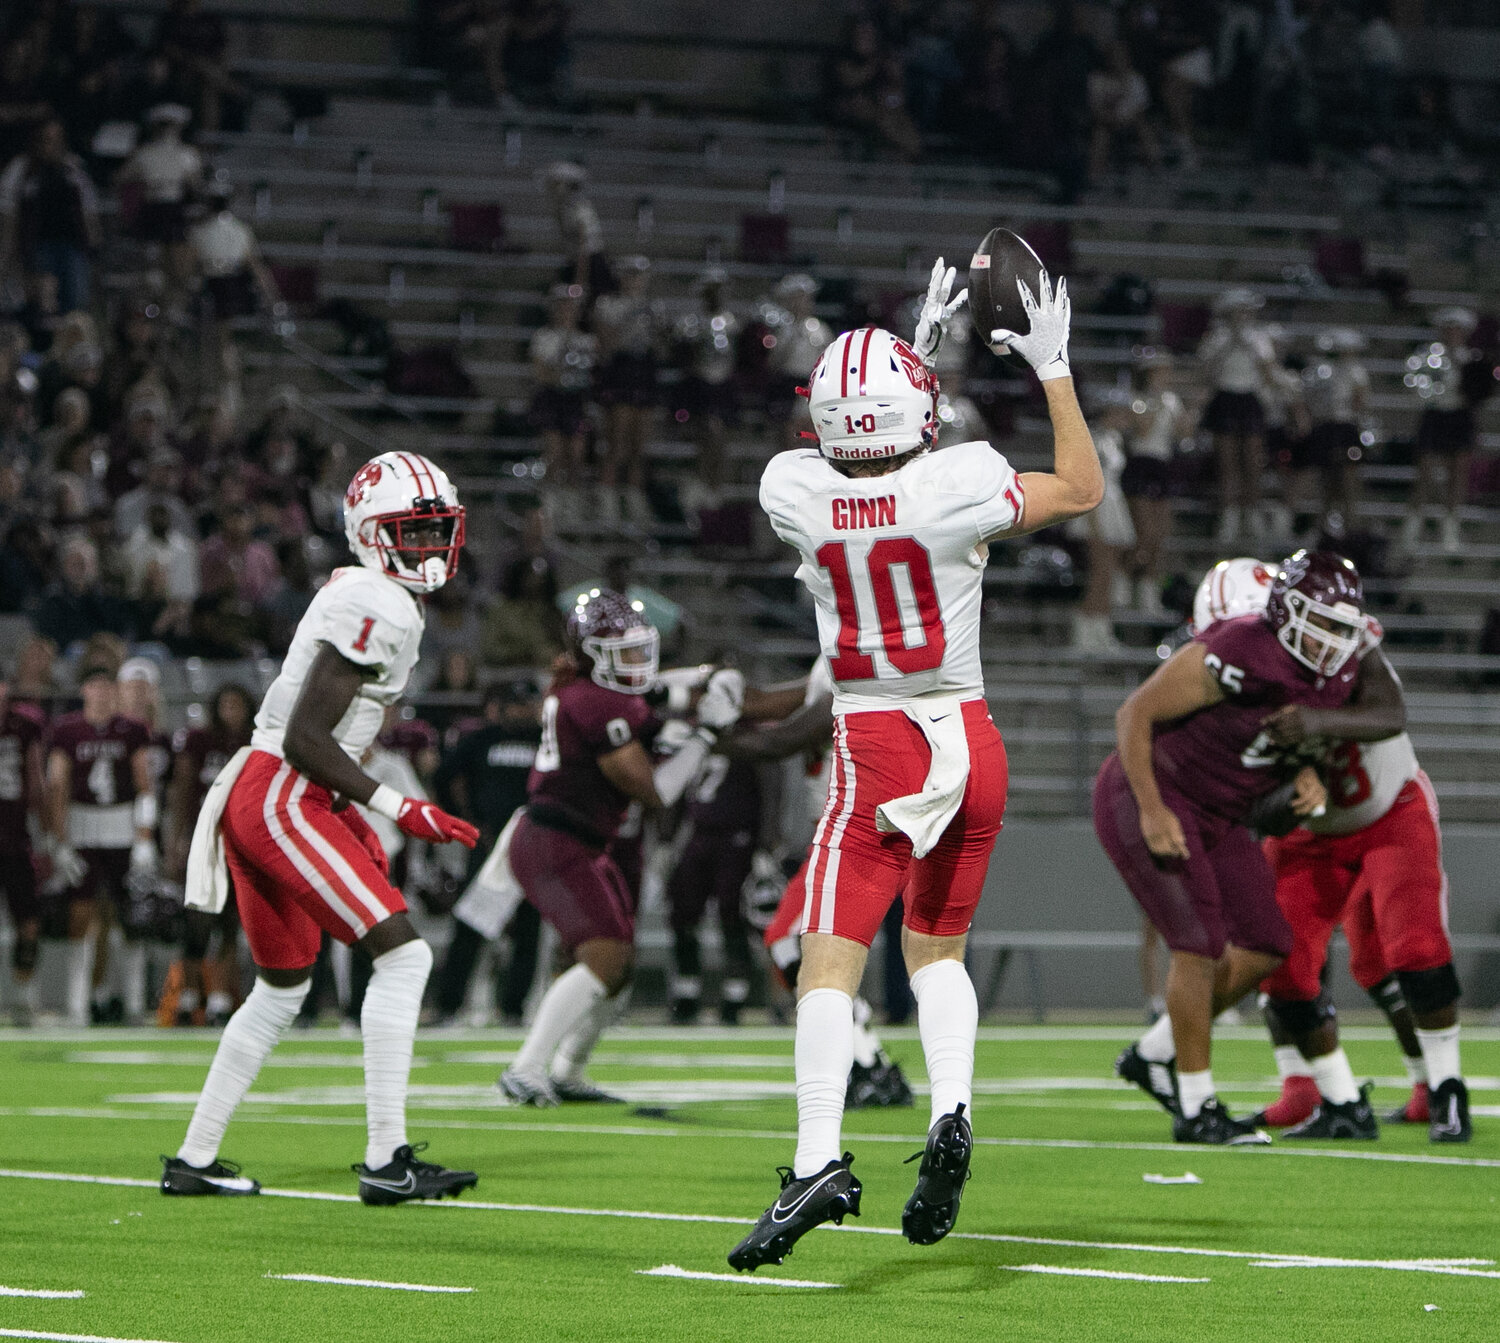 Oliver Ginn catches a pass during Friday's area round game between Katy and Cy-Fair at the Berry Center in Cypress.